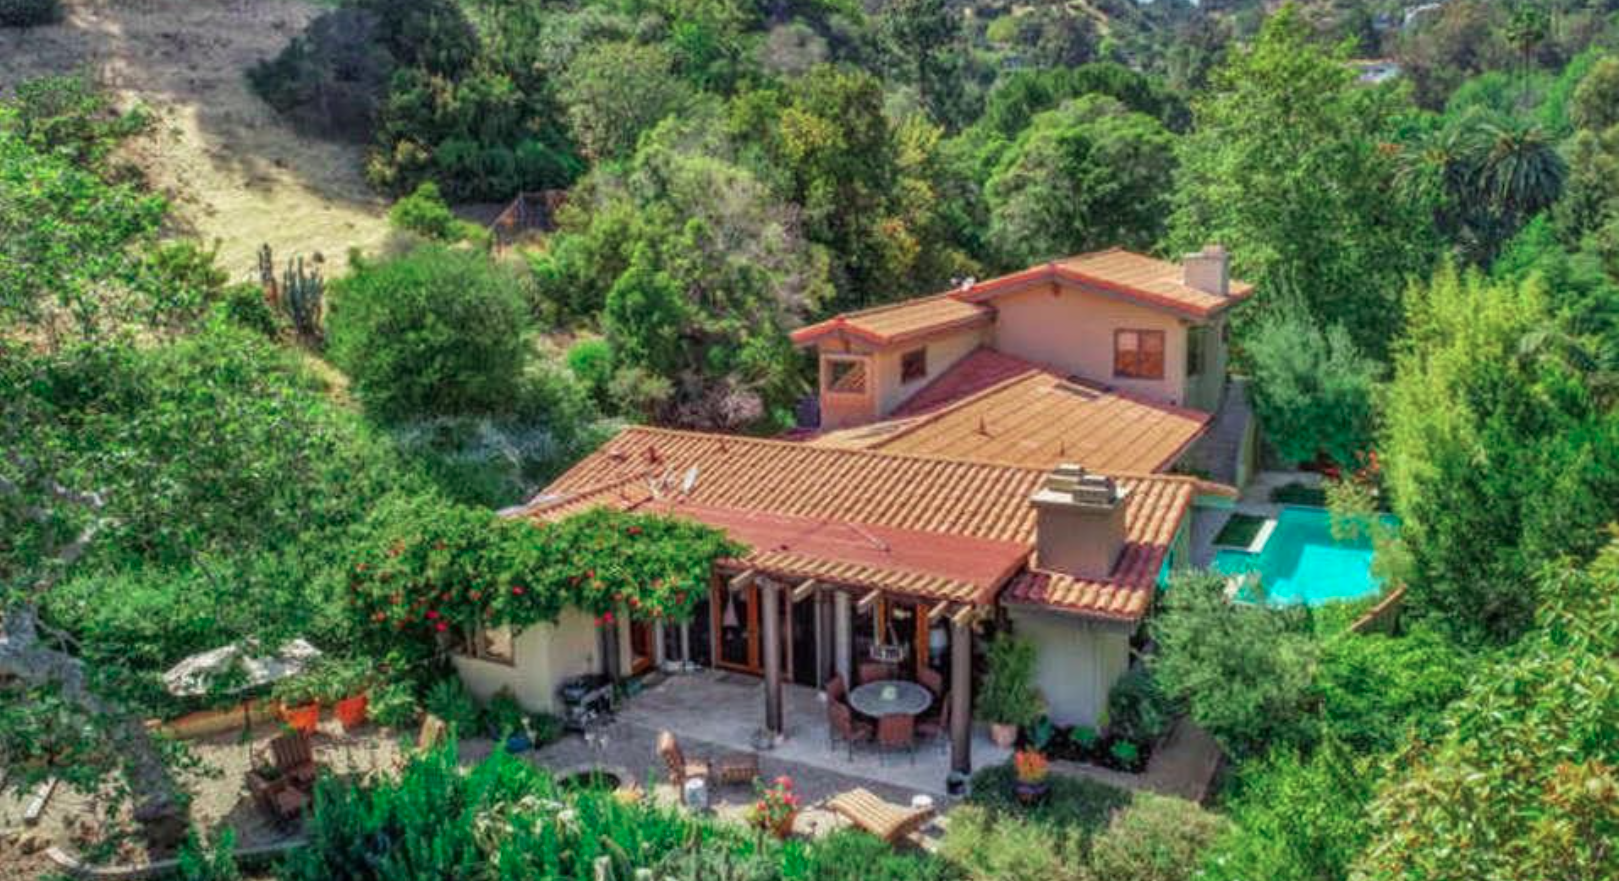 Russell Brand's Hollywood Hills Home